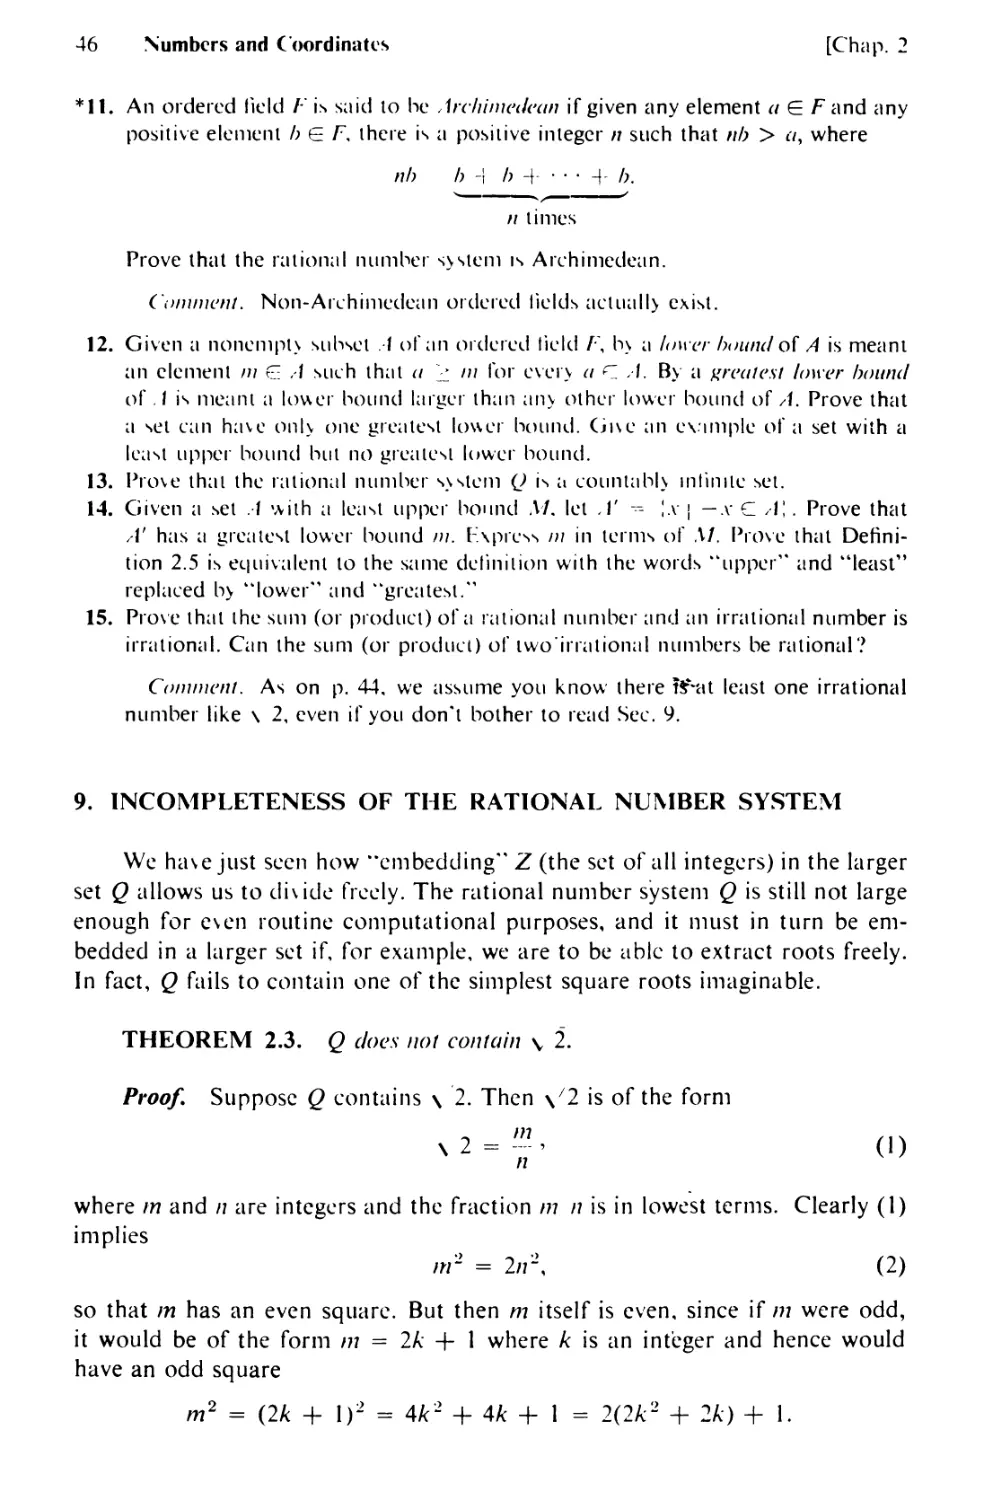 9. Incompleteness of the Rational Number System